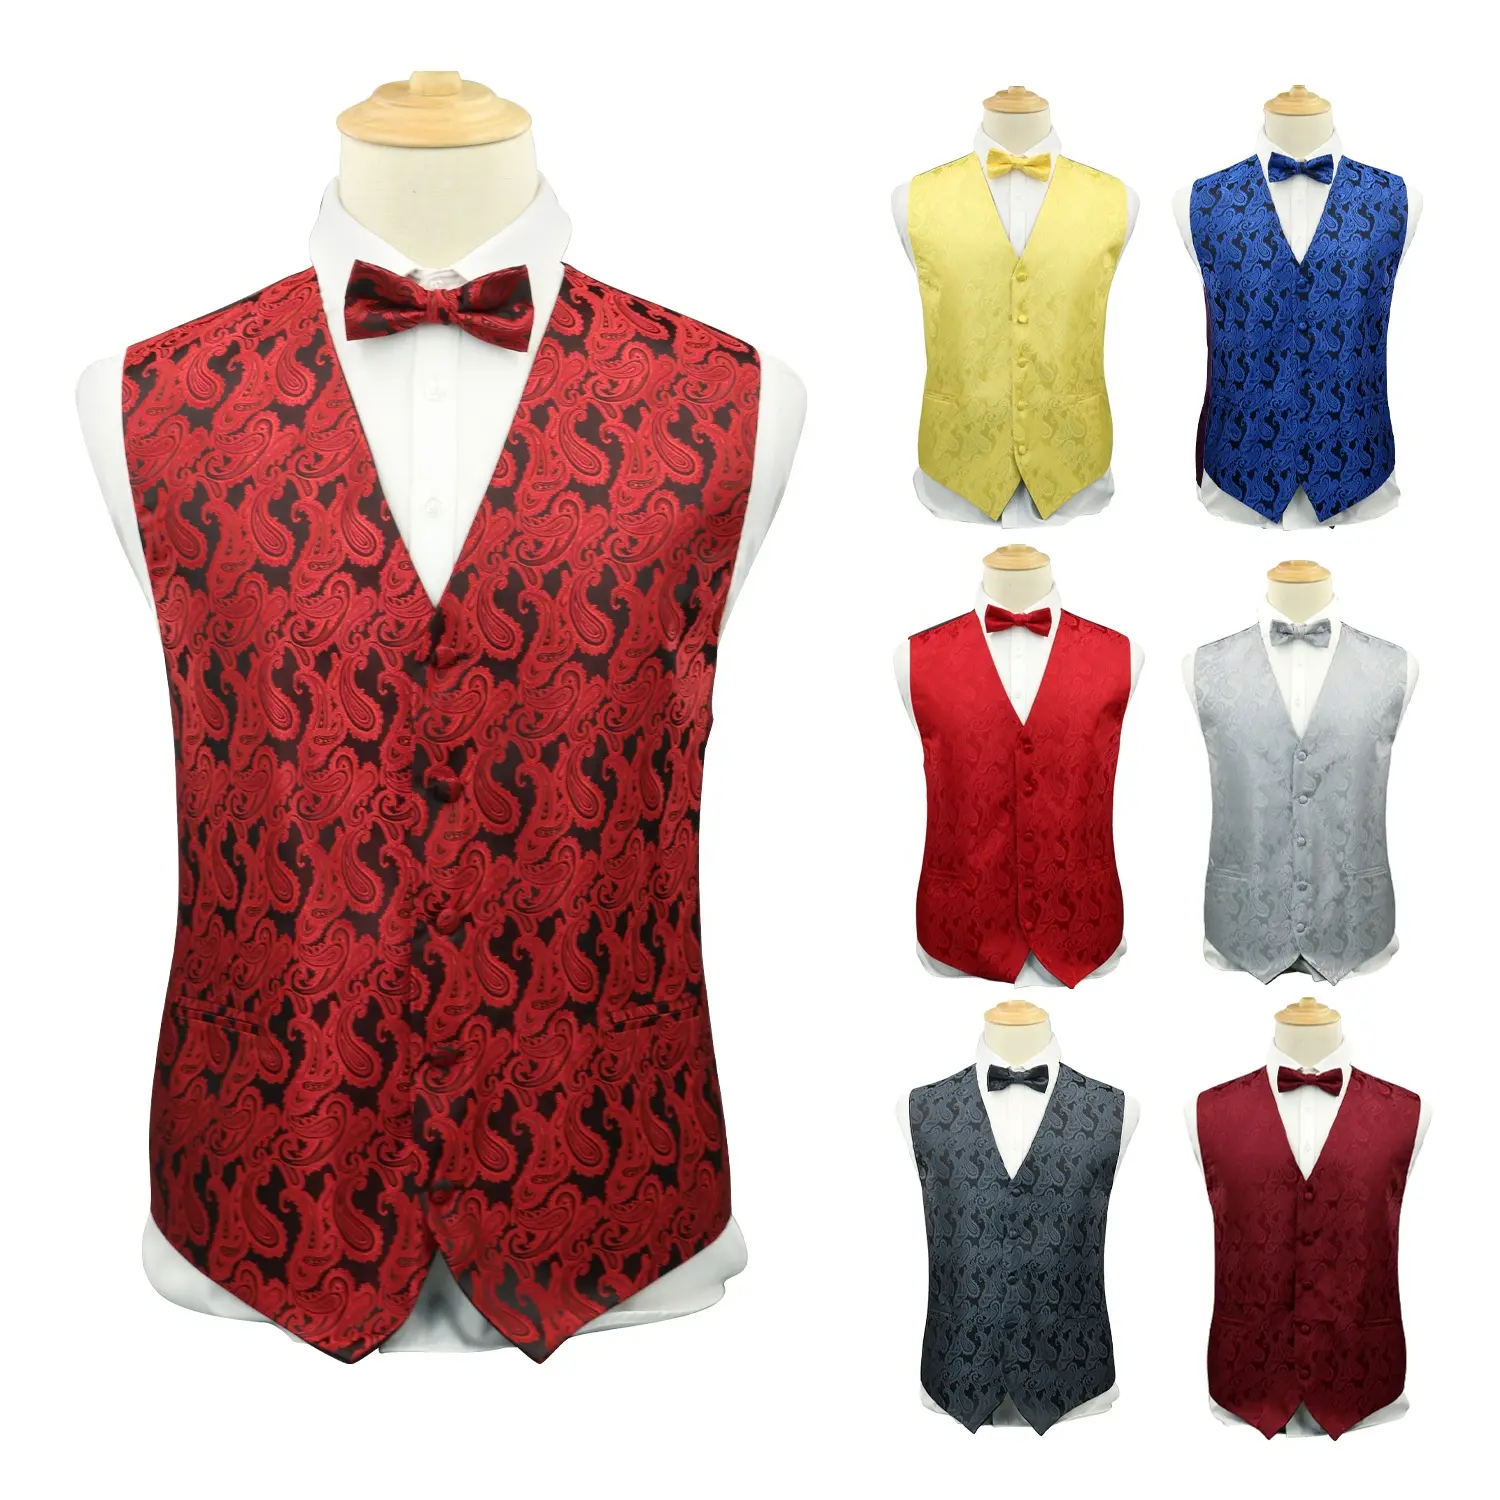 Ready to Ship High Quality Men's Vest Bow Tie Set Paisley Floral Jacquard Bowtie Formal Waistcoat for Suit or Tuxedo